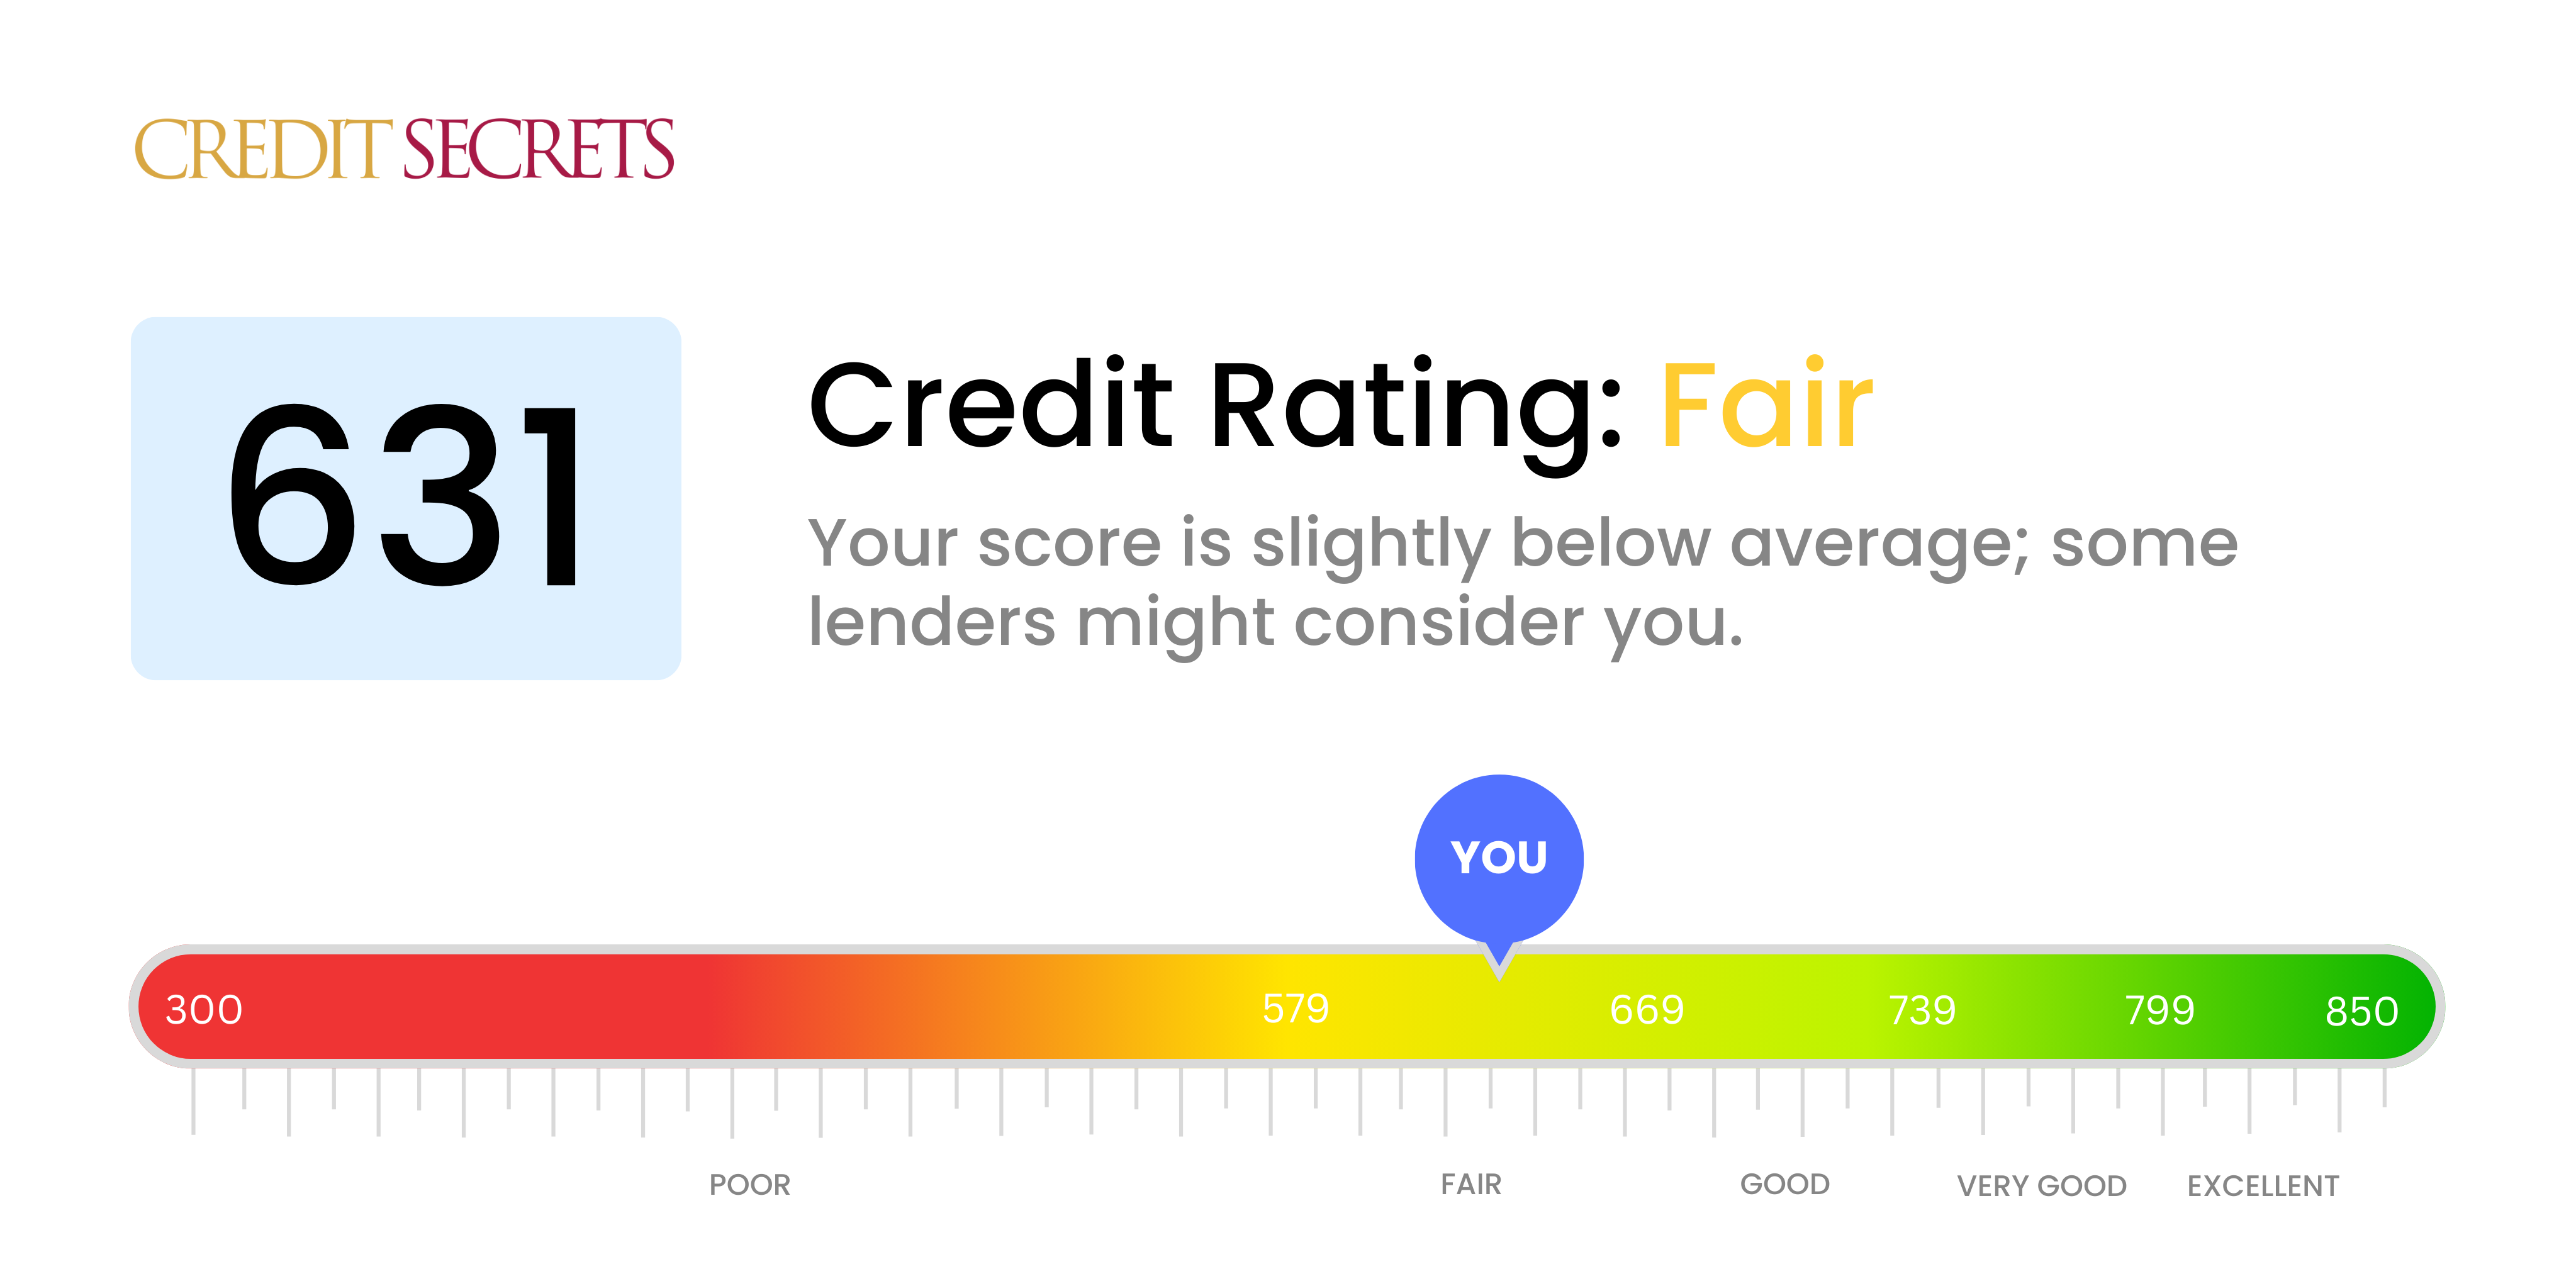 Is 631 a good credit score?